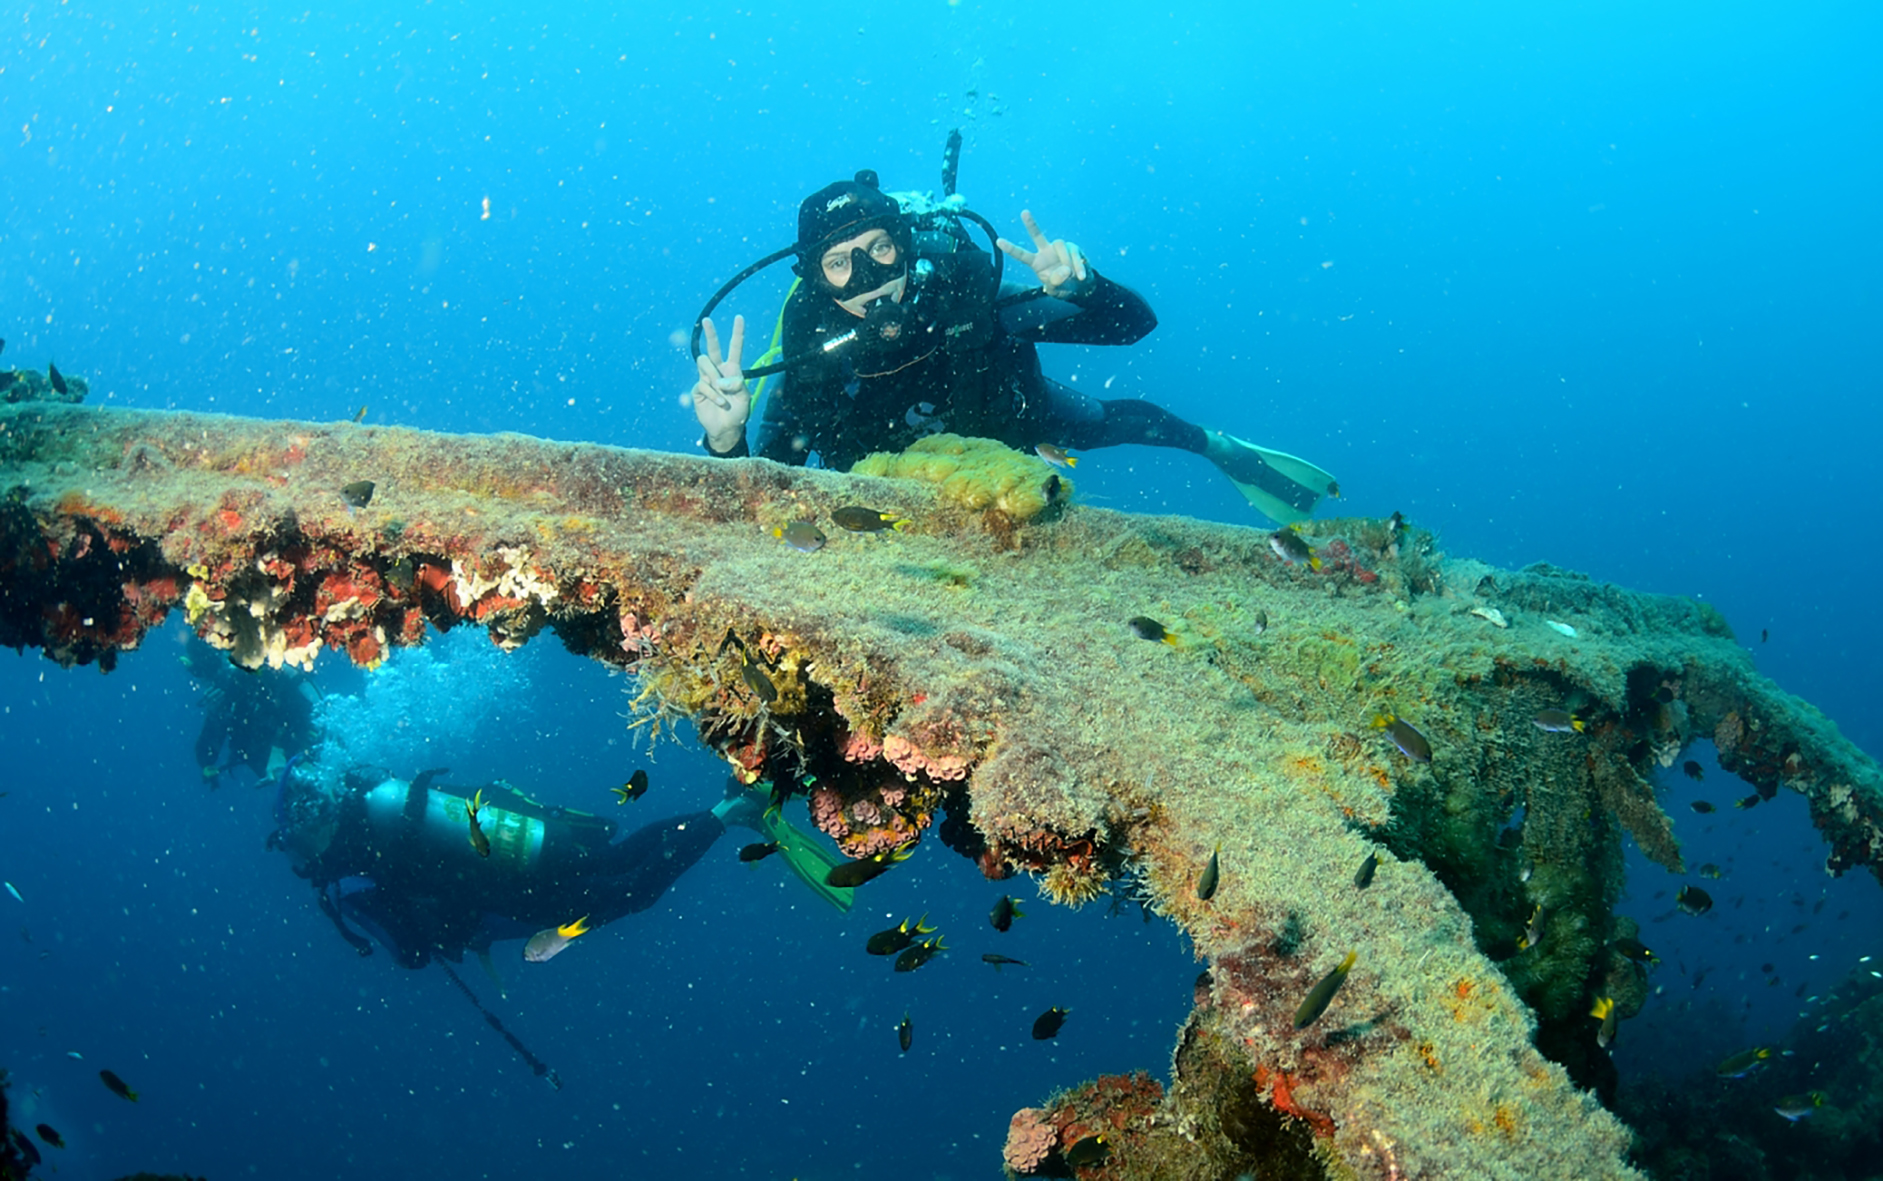 Exploring the Yongala shipwreck with Adrenalin Dive out of Townsville